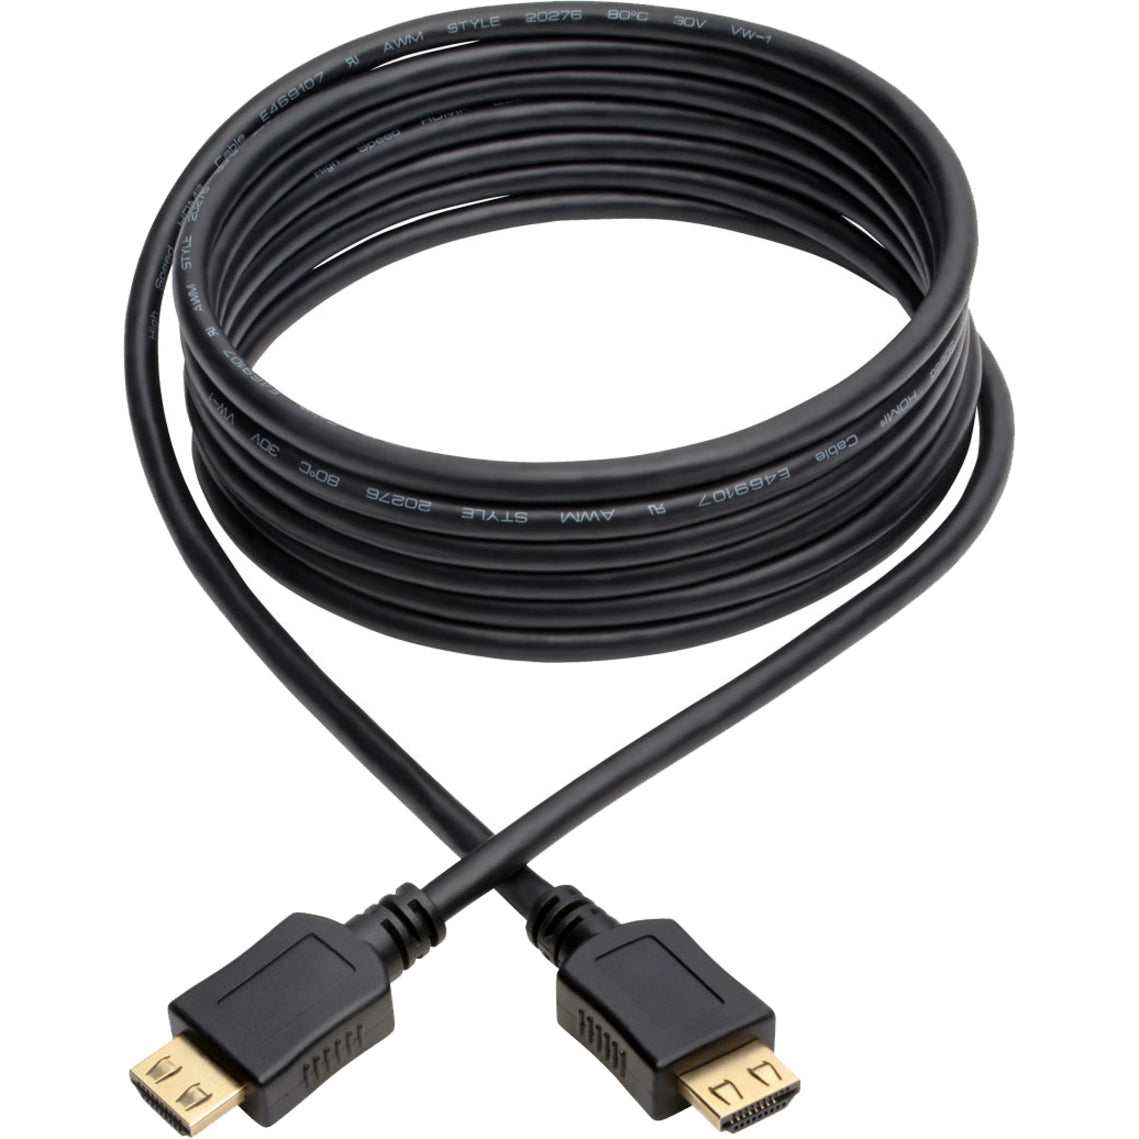 Tripp Lite P568-010-BK-GRP High-Speed HDMI Cable, 10 ft., with Gripping Connectors - 4K, Black